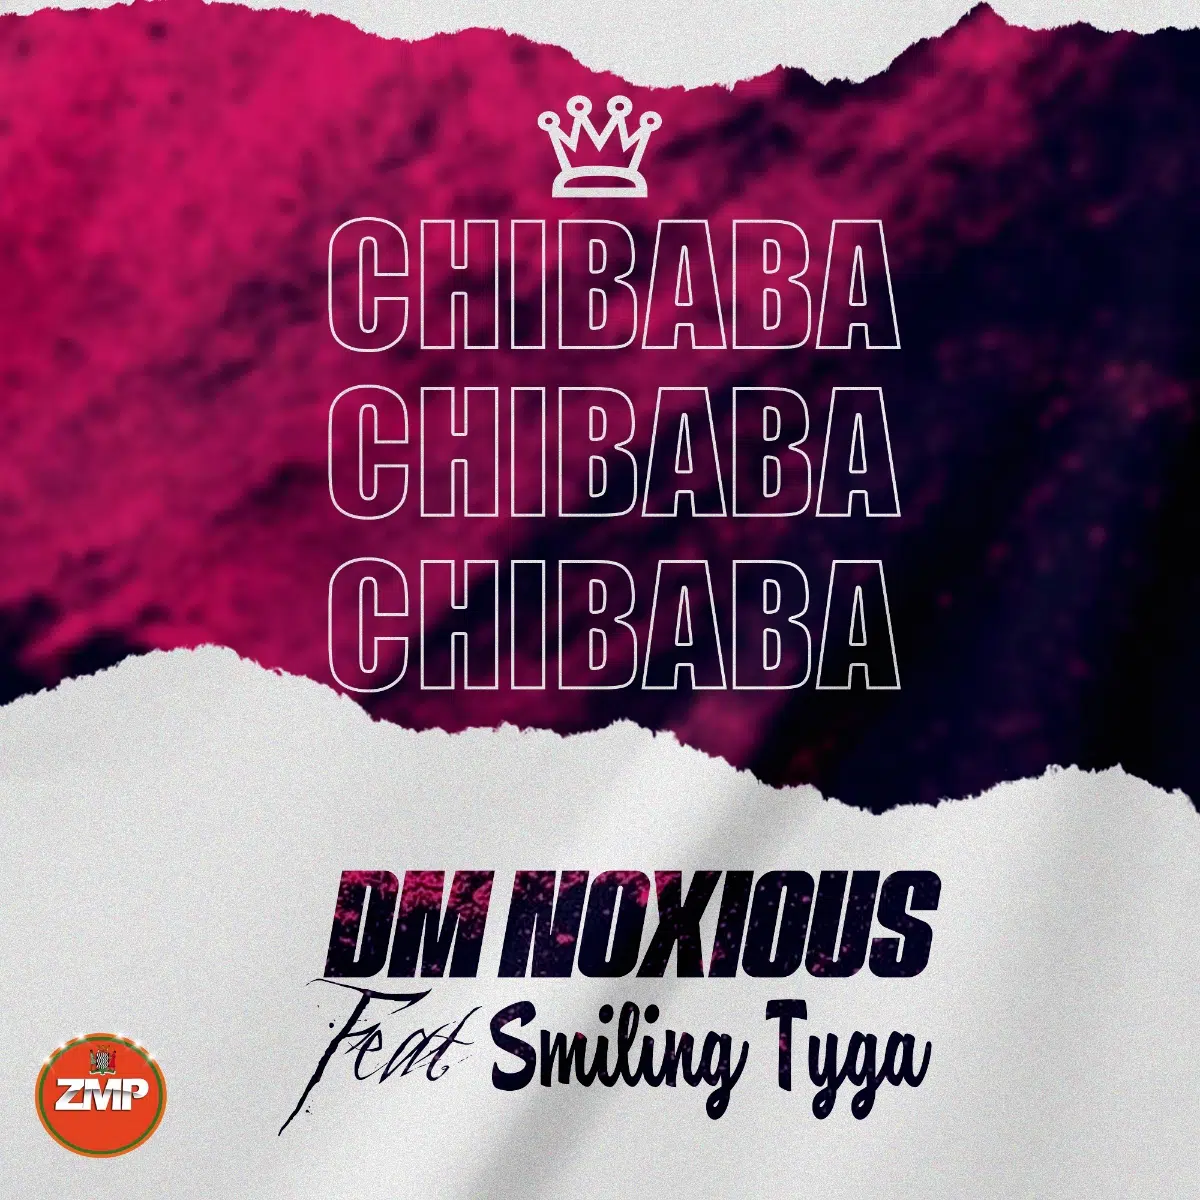 DOWNLOAD: Dm Noxious Feat Smilling Tyga – “Chibaba” Mp3